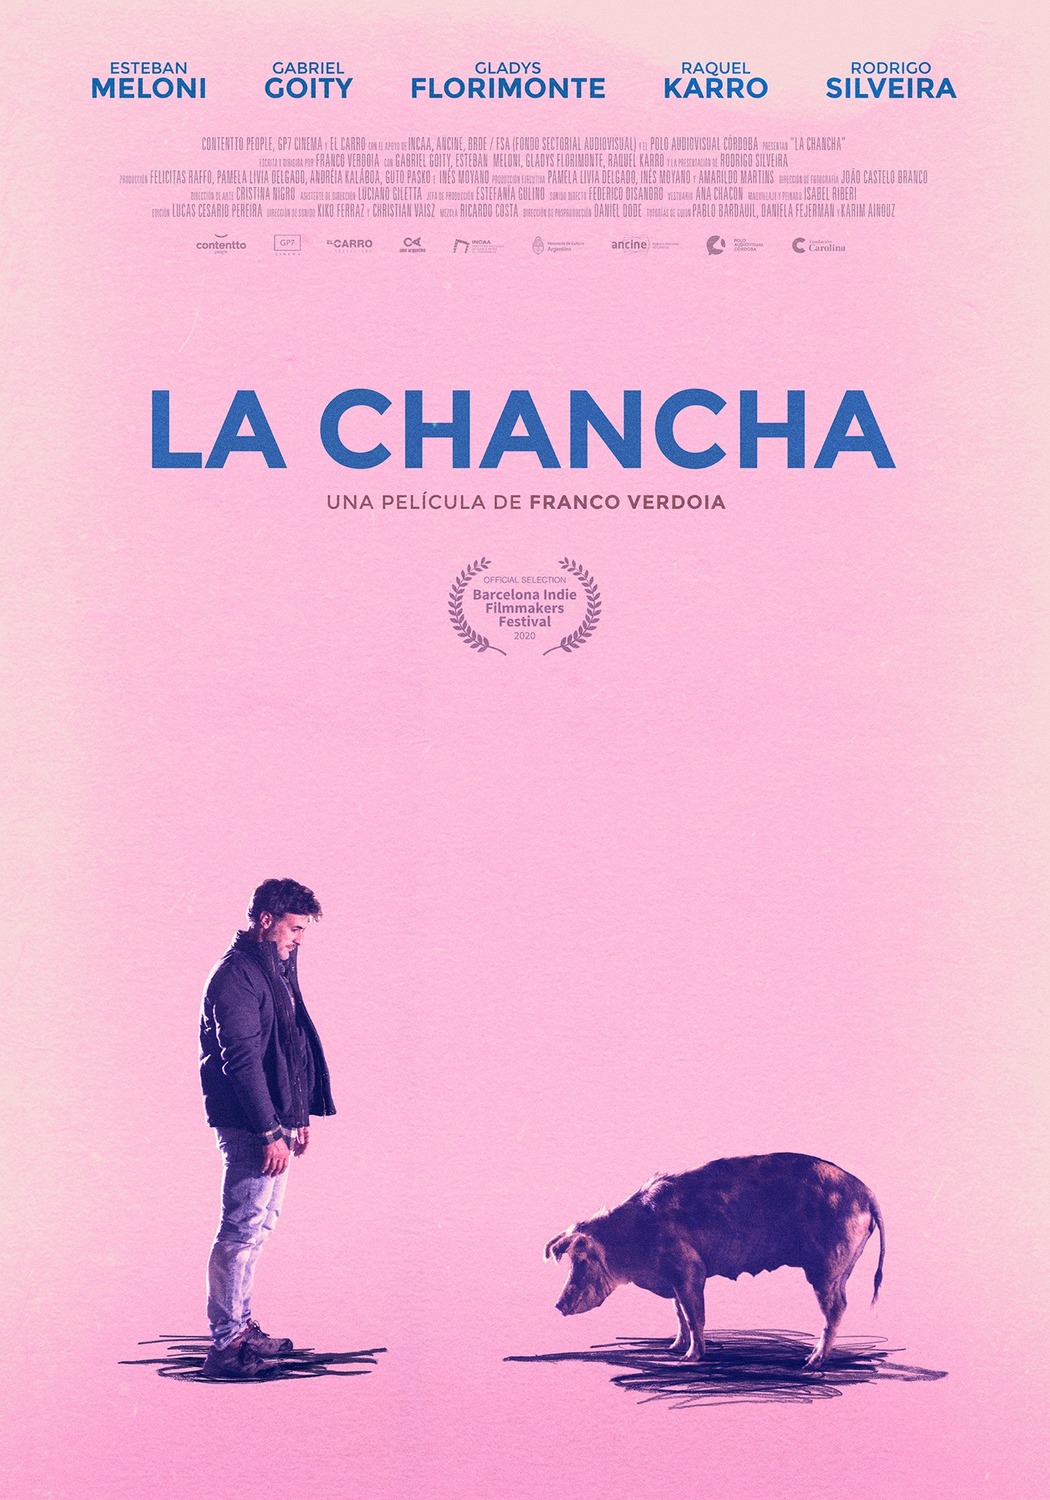 Extra Large Movie Poster Image for La chancha (#2 of 2)